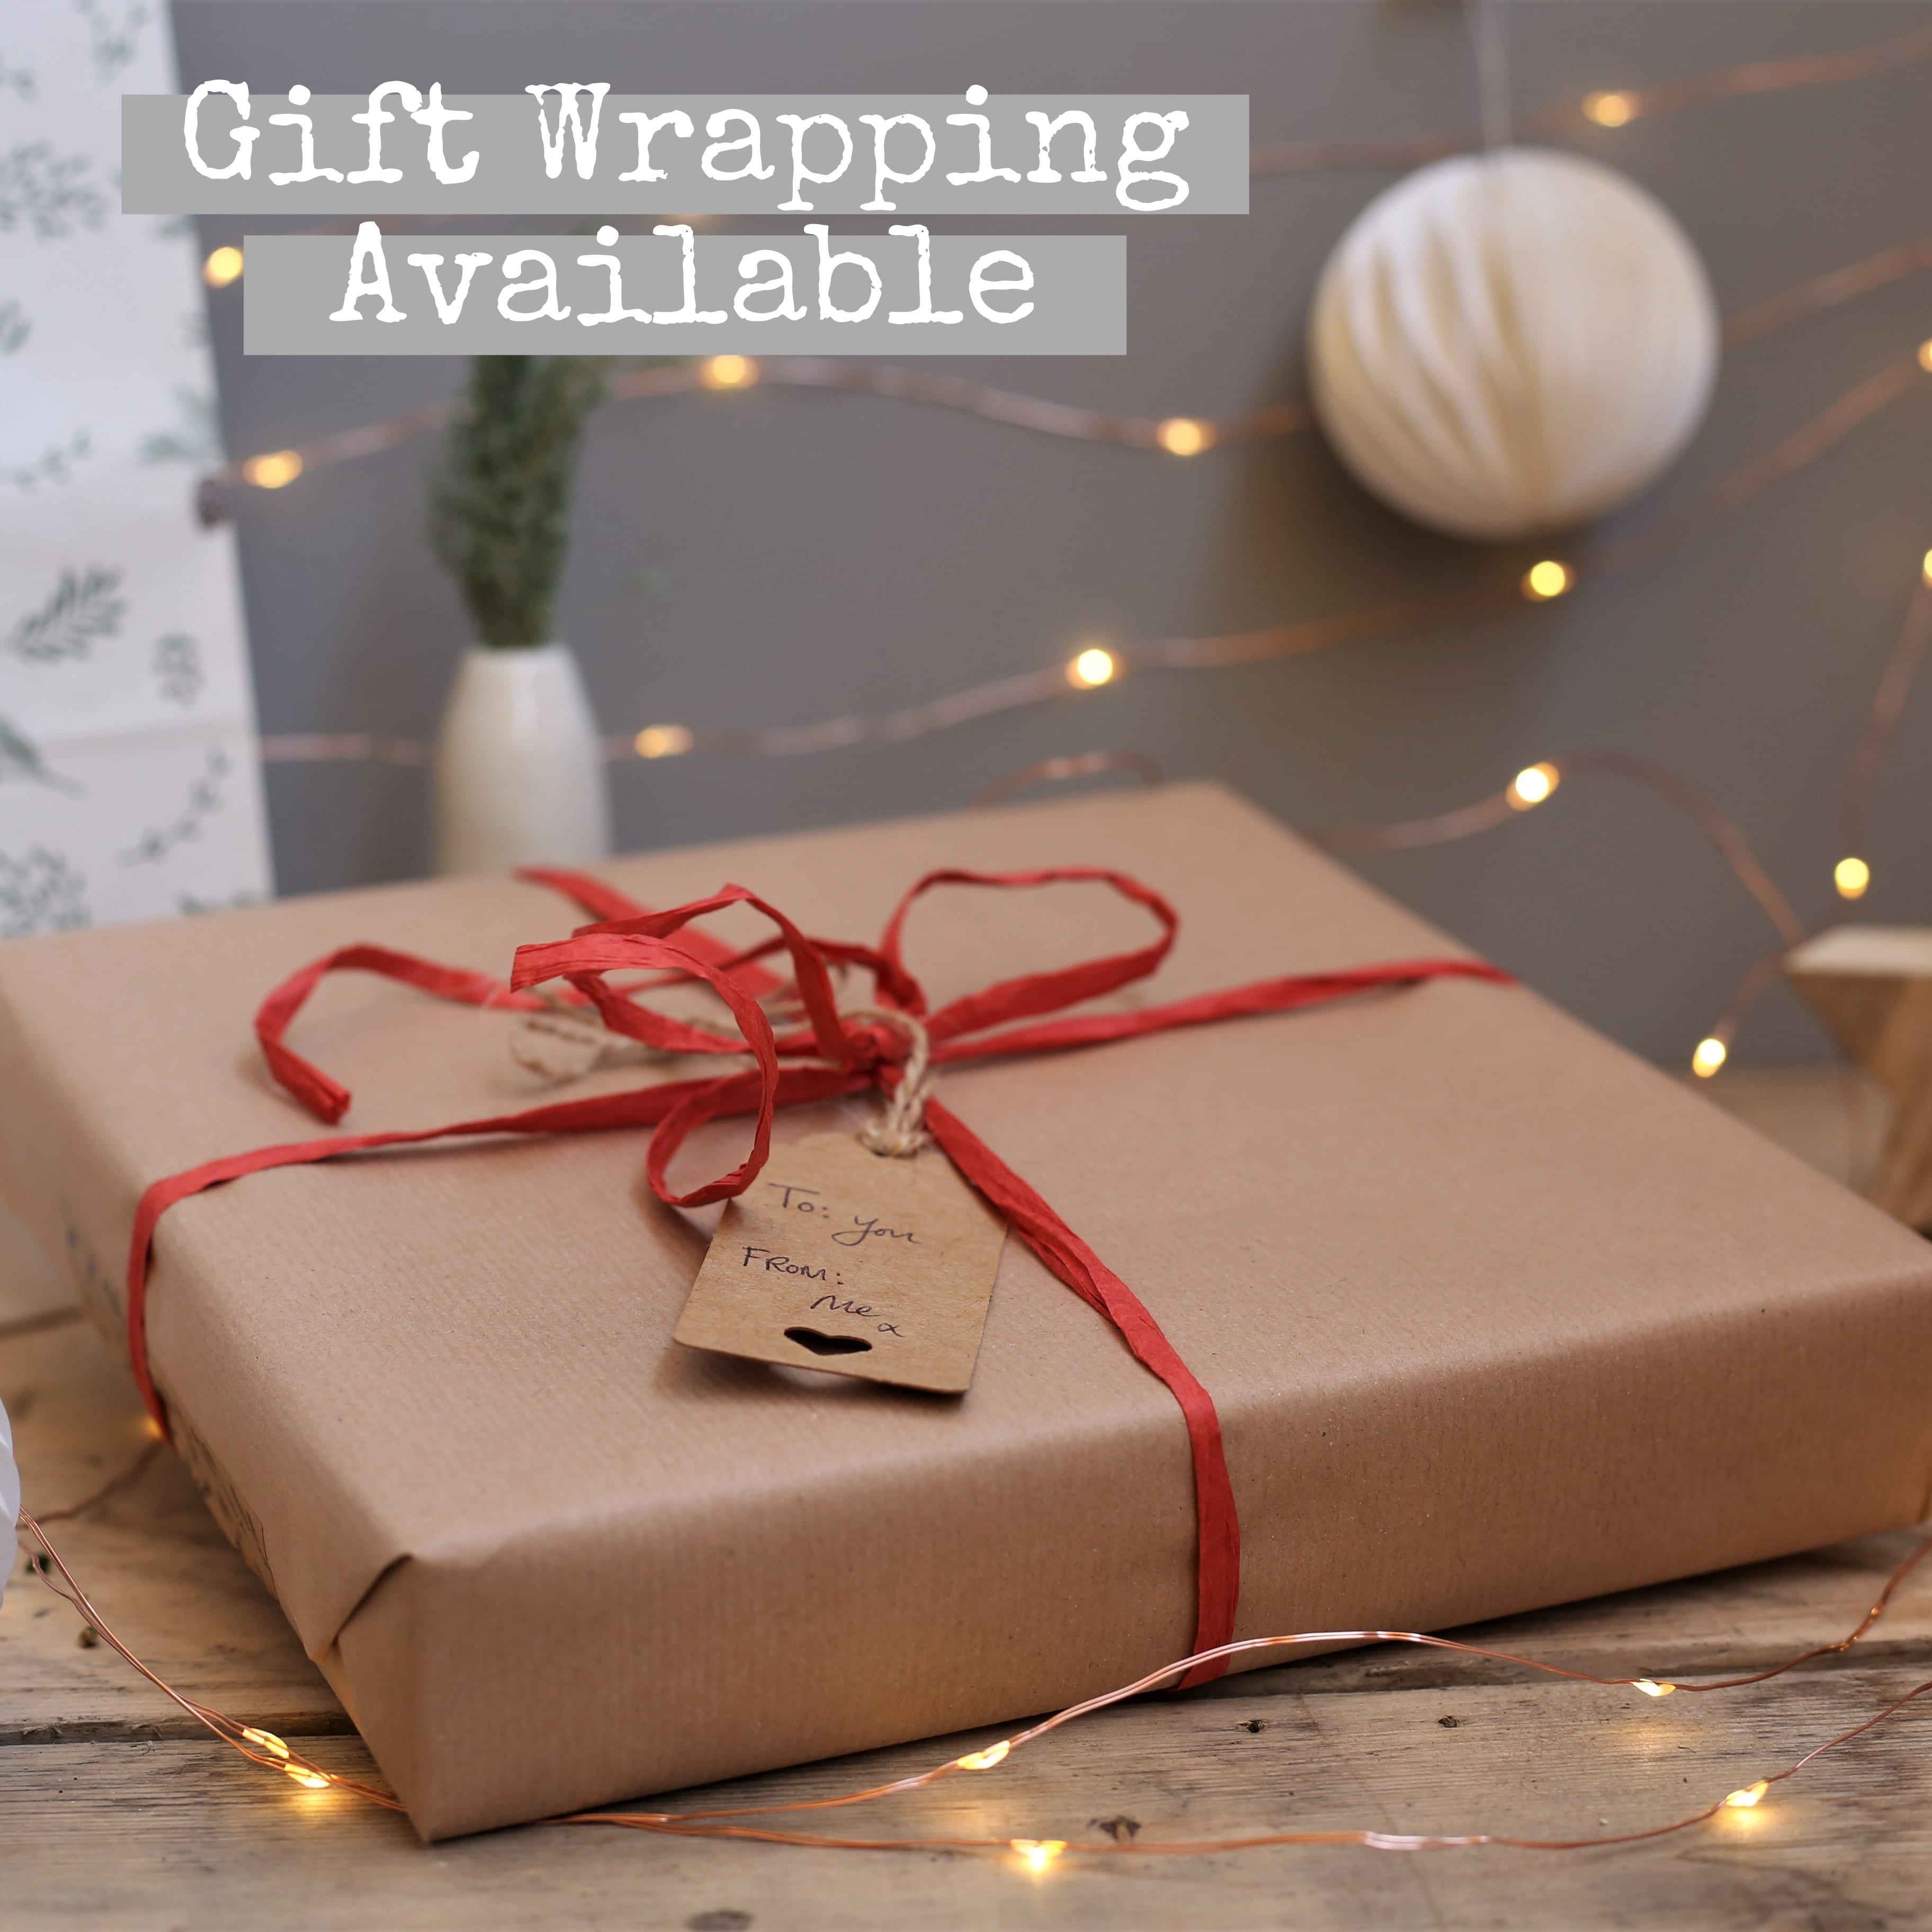 Grift wrapping